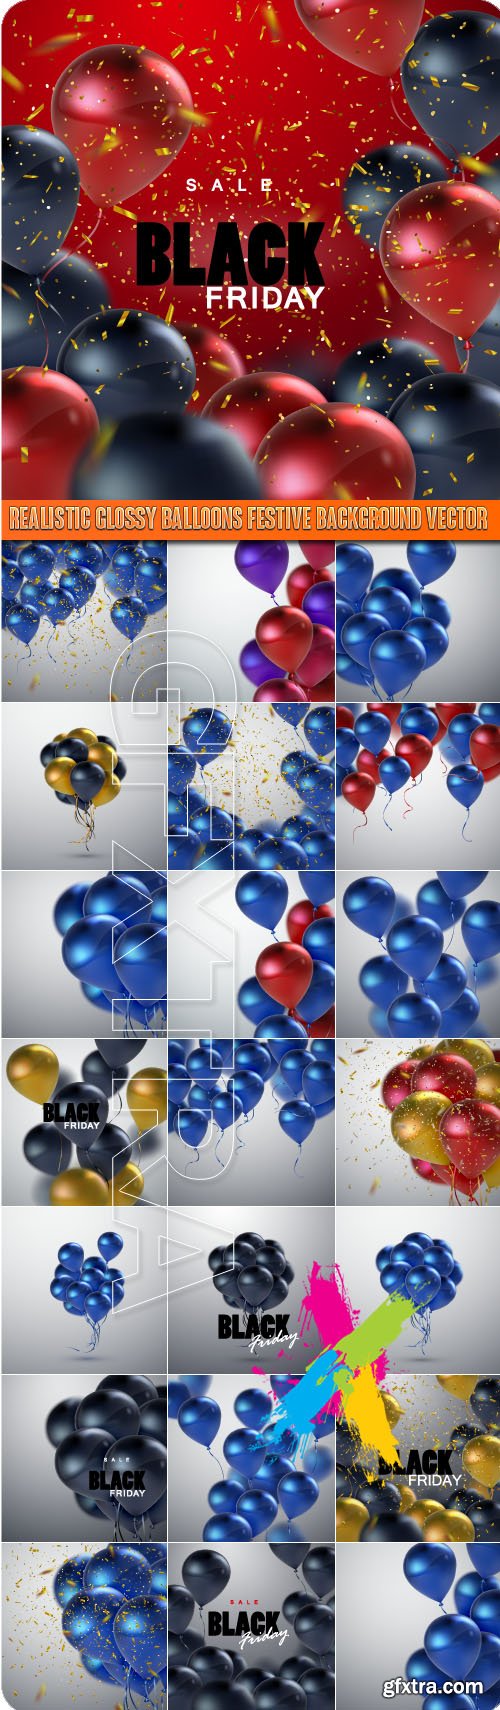 Realistic glossy balloons festive background vector